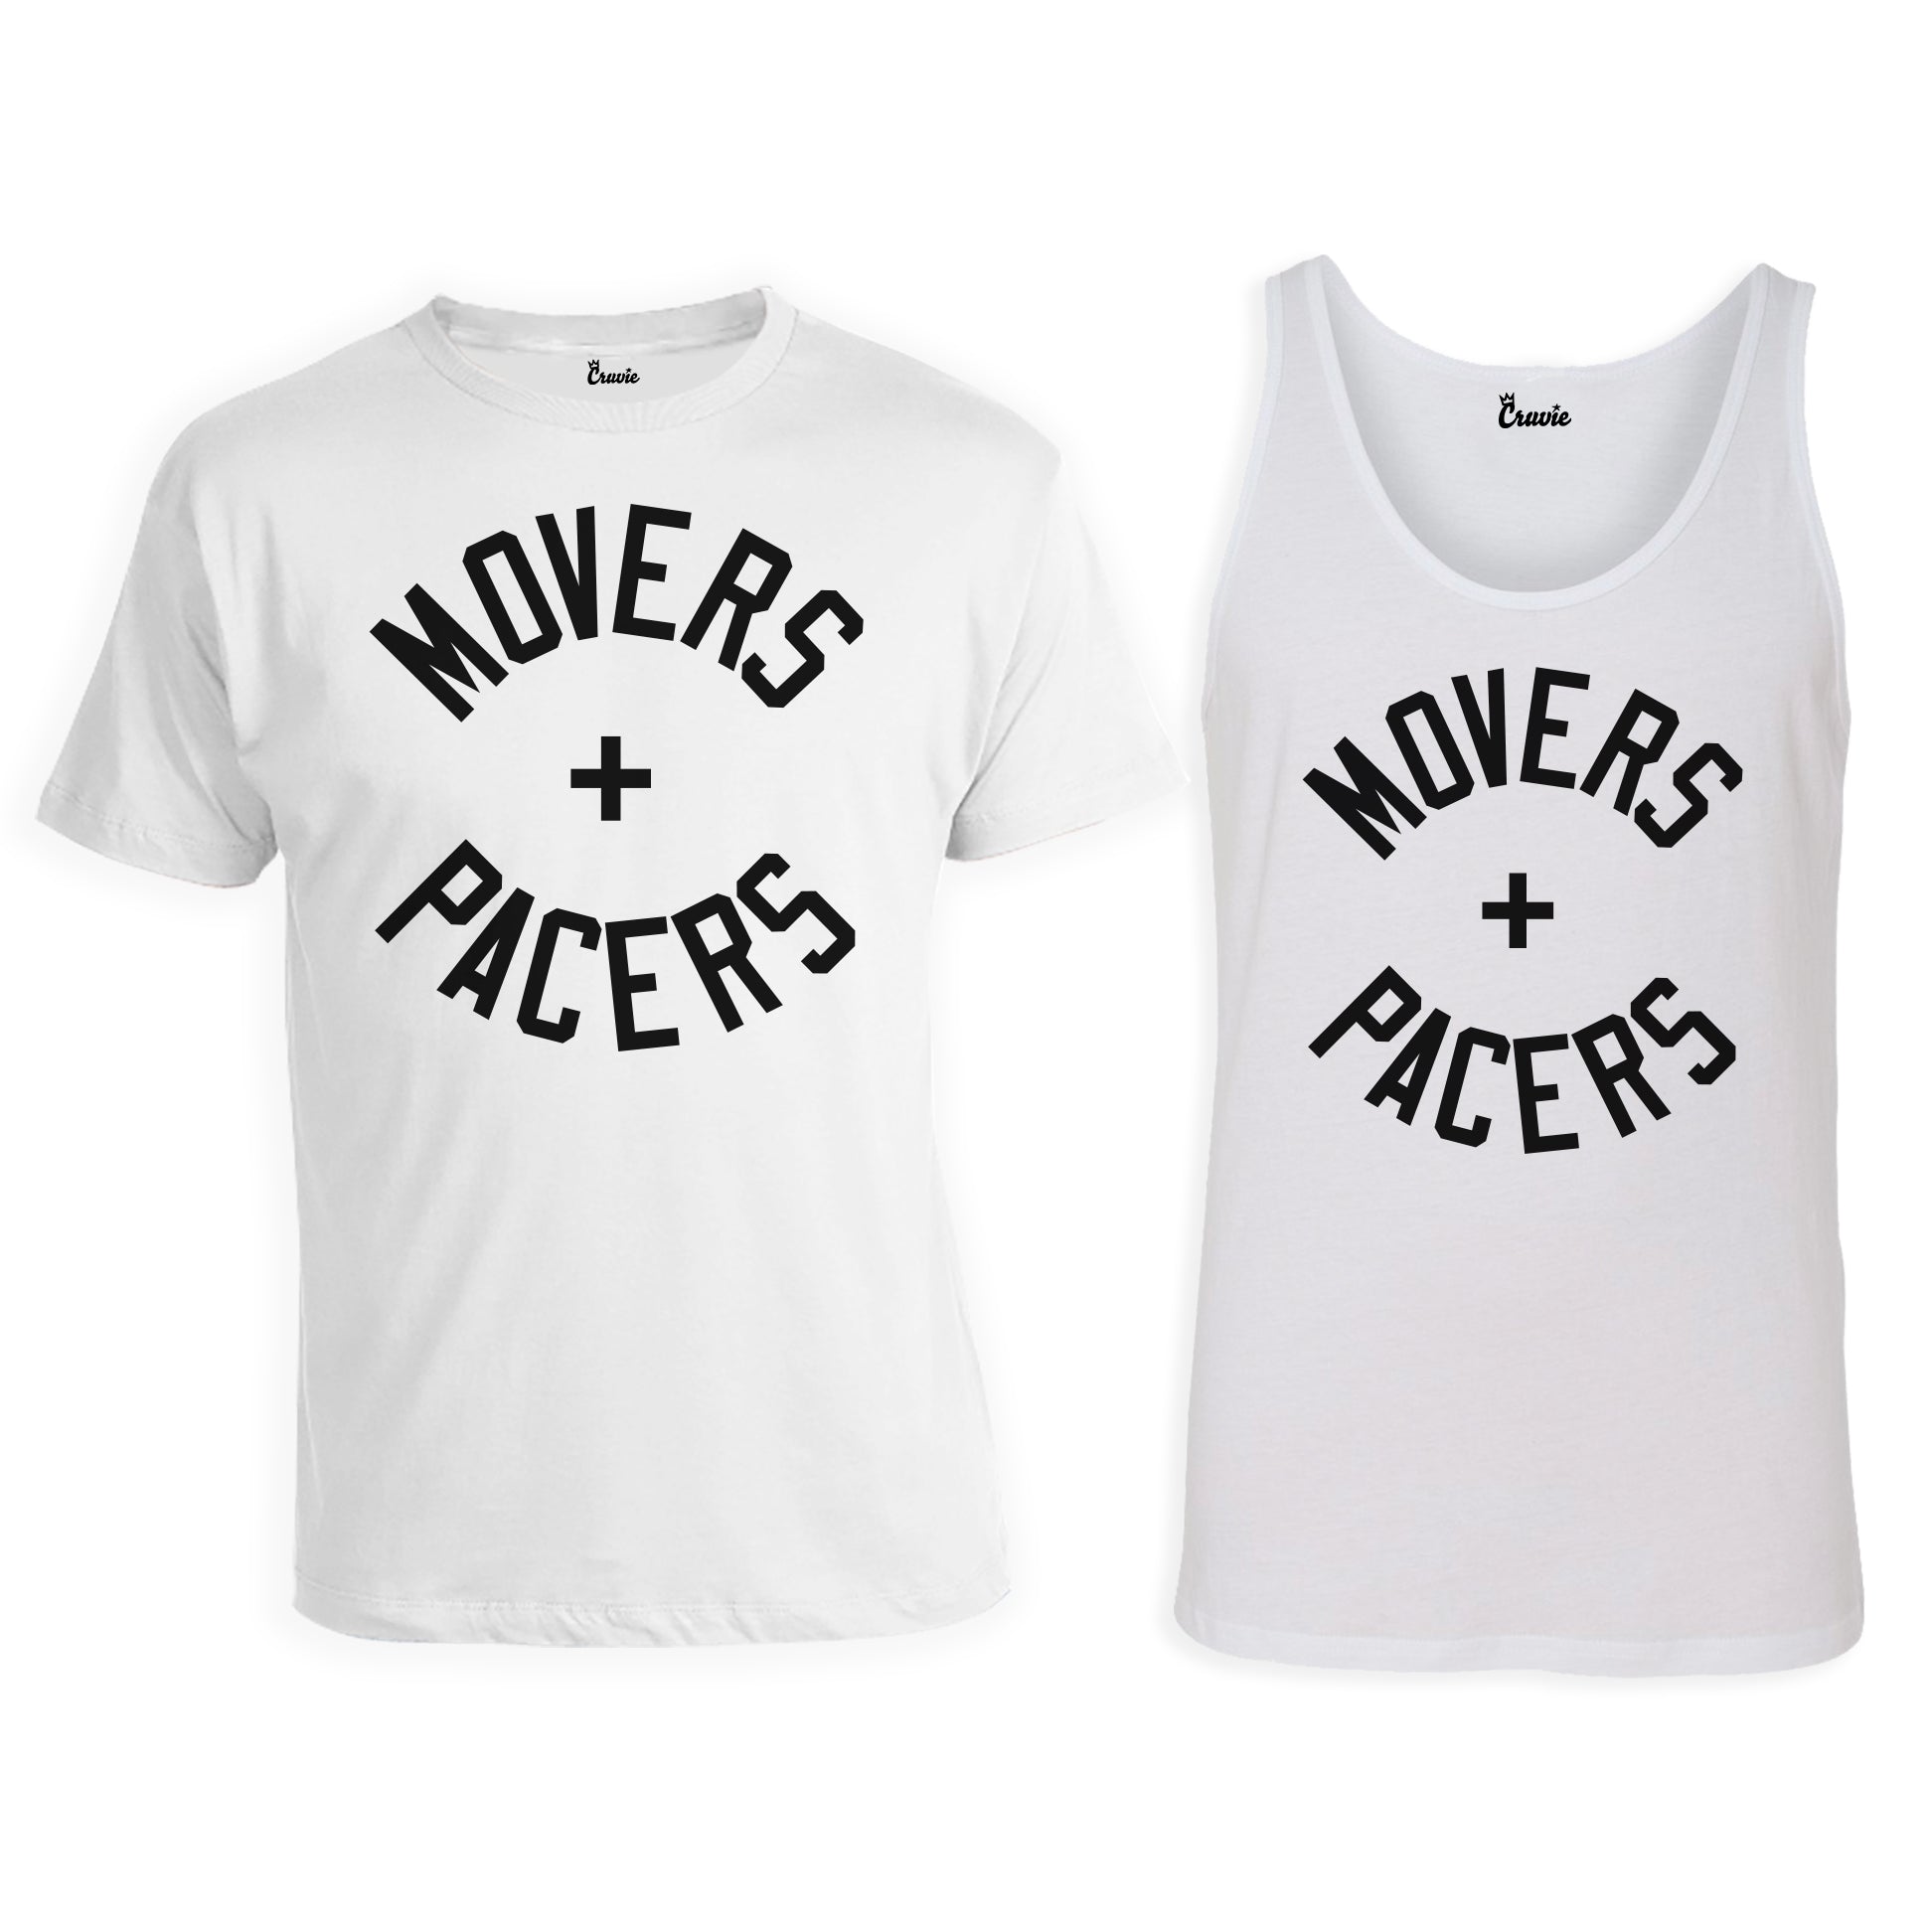 Movers + Pacers Shirts - White